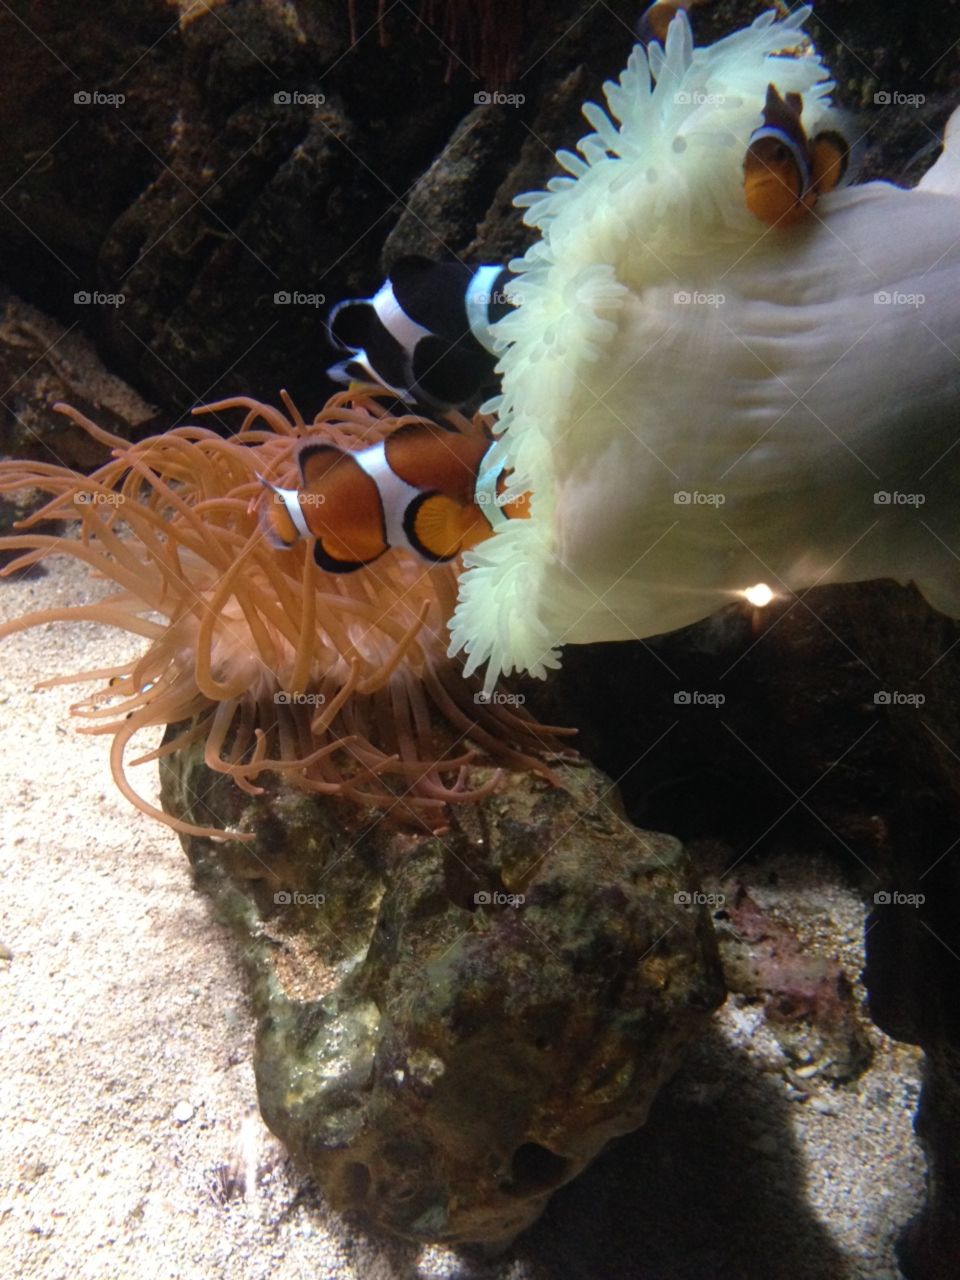 A miniature nemo, clown fish and his friend swimming in their tank surrounded by rocks and sand